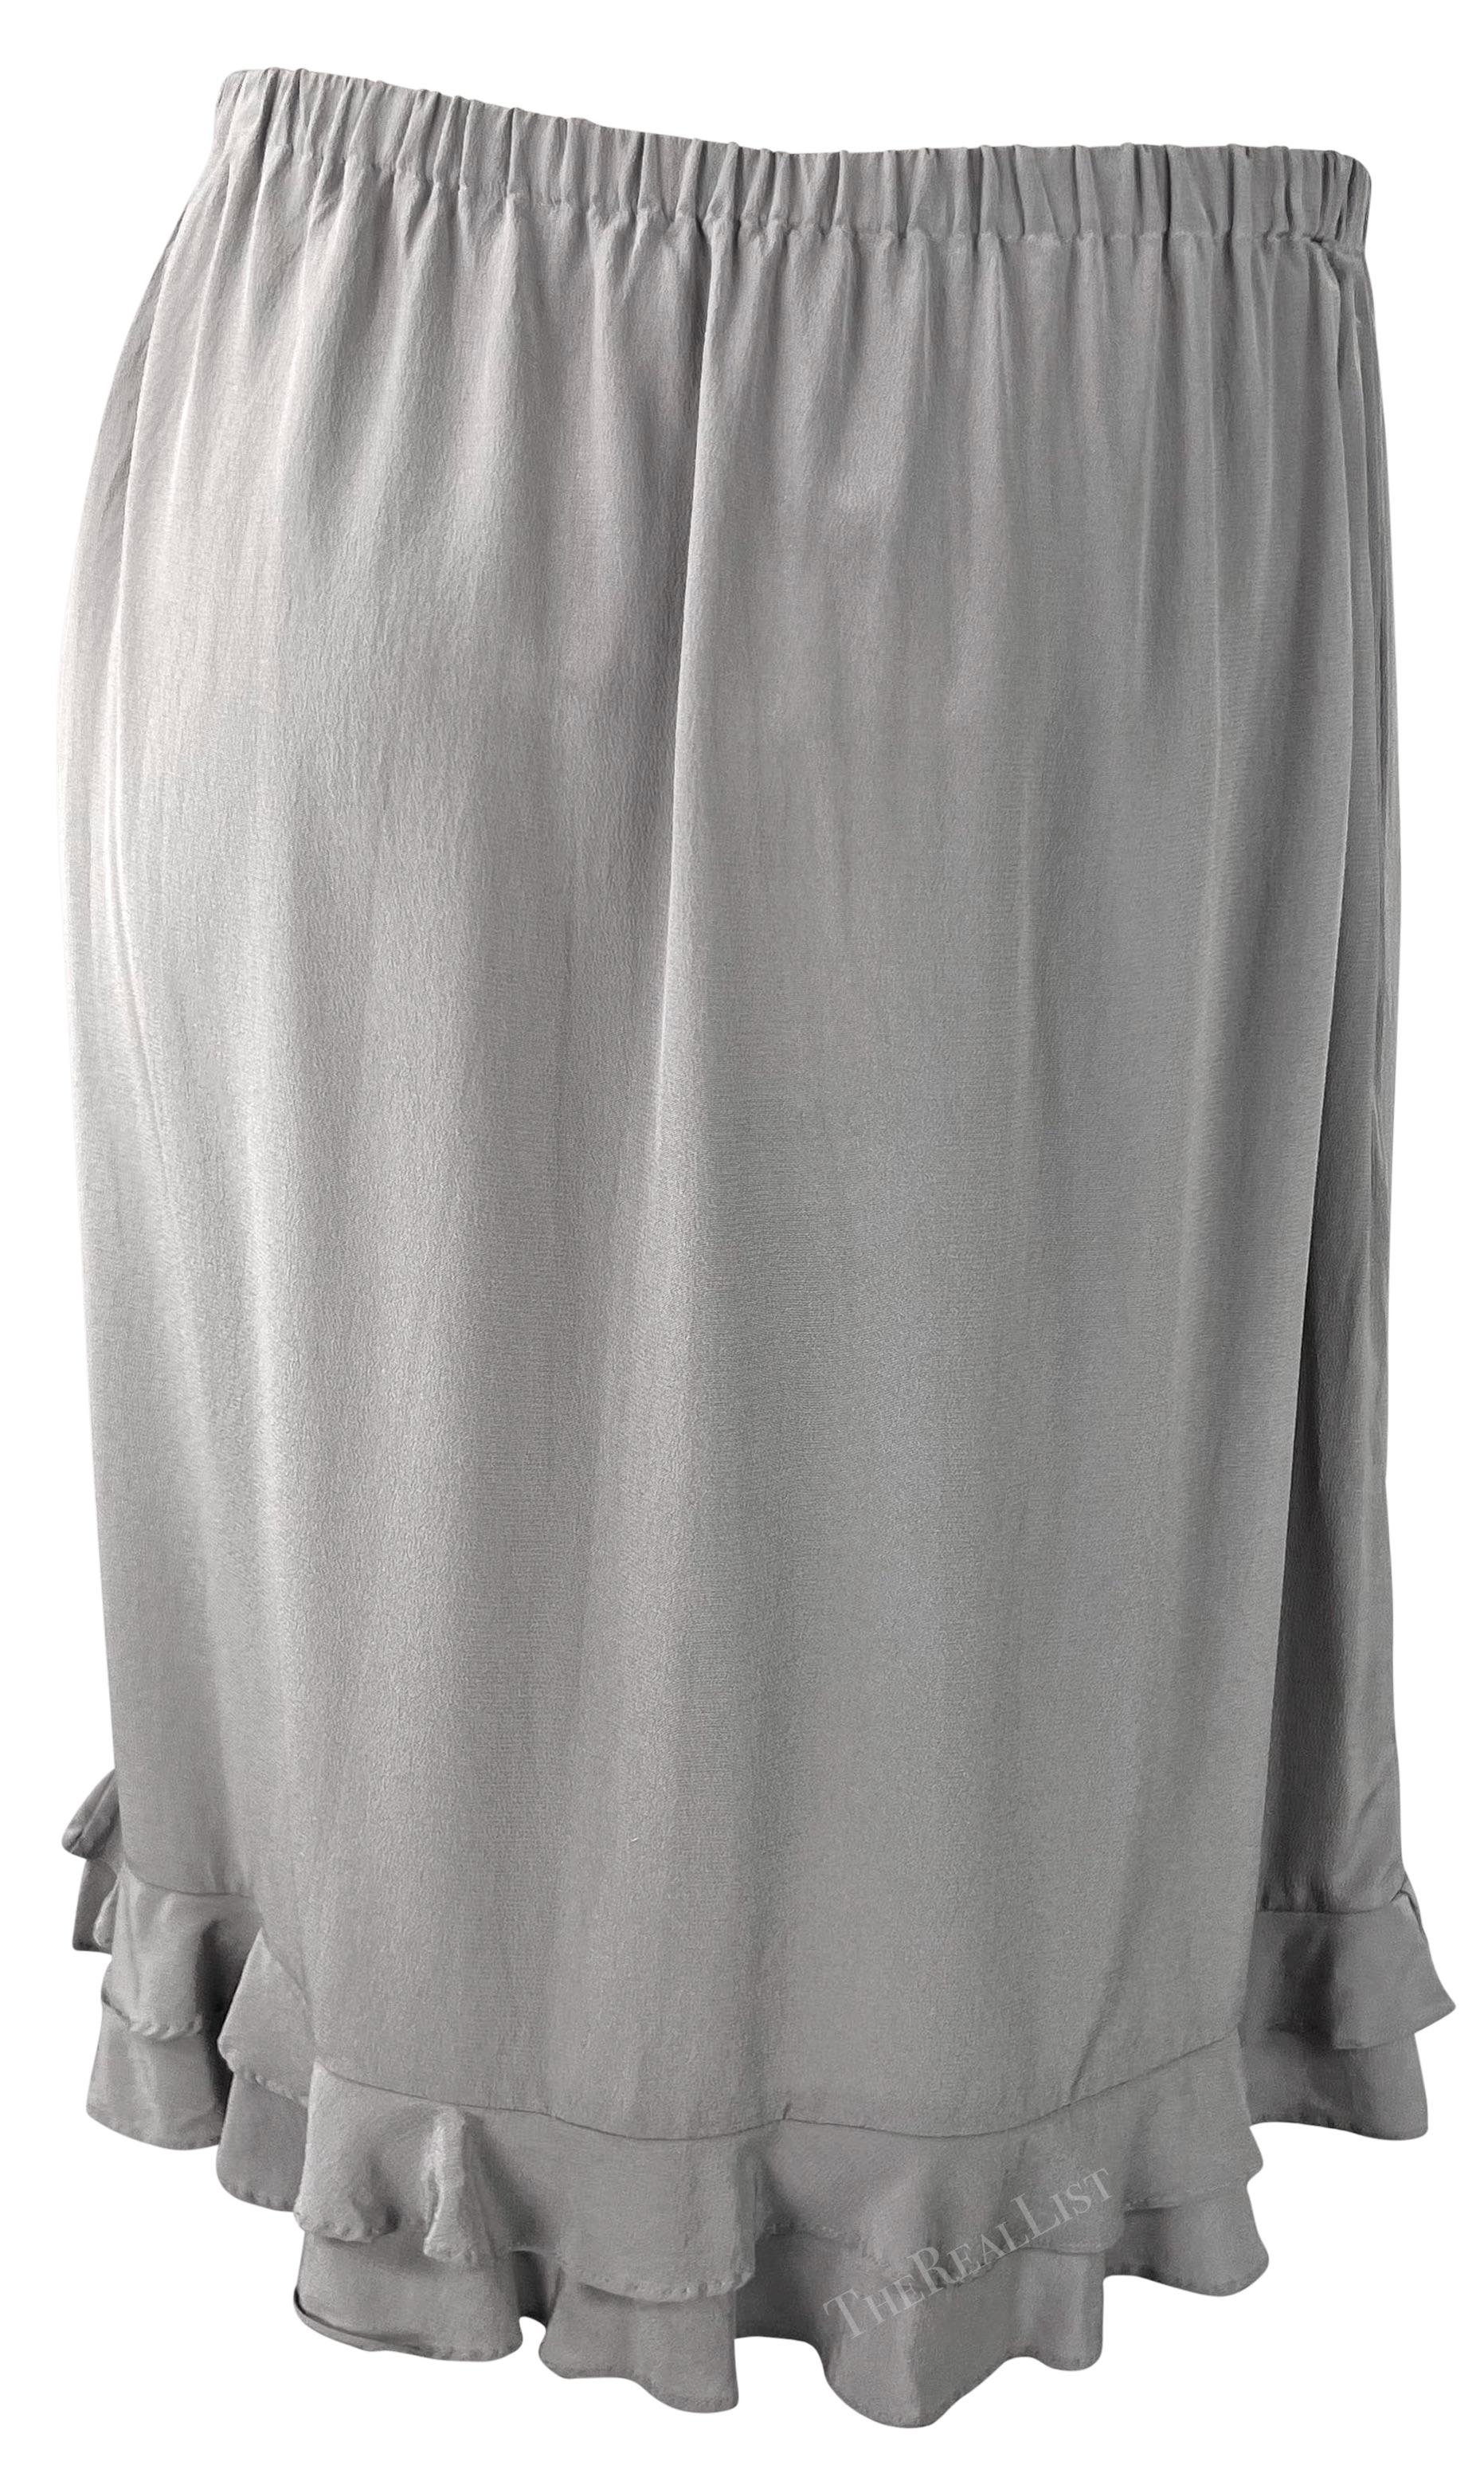 S/S 1999 Gucci by Tom Ford Ruffled Grey Silk Long Sleeve Top Skirt Set For Sale 7